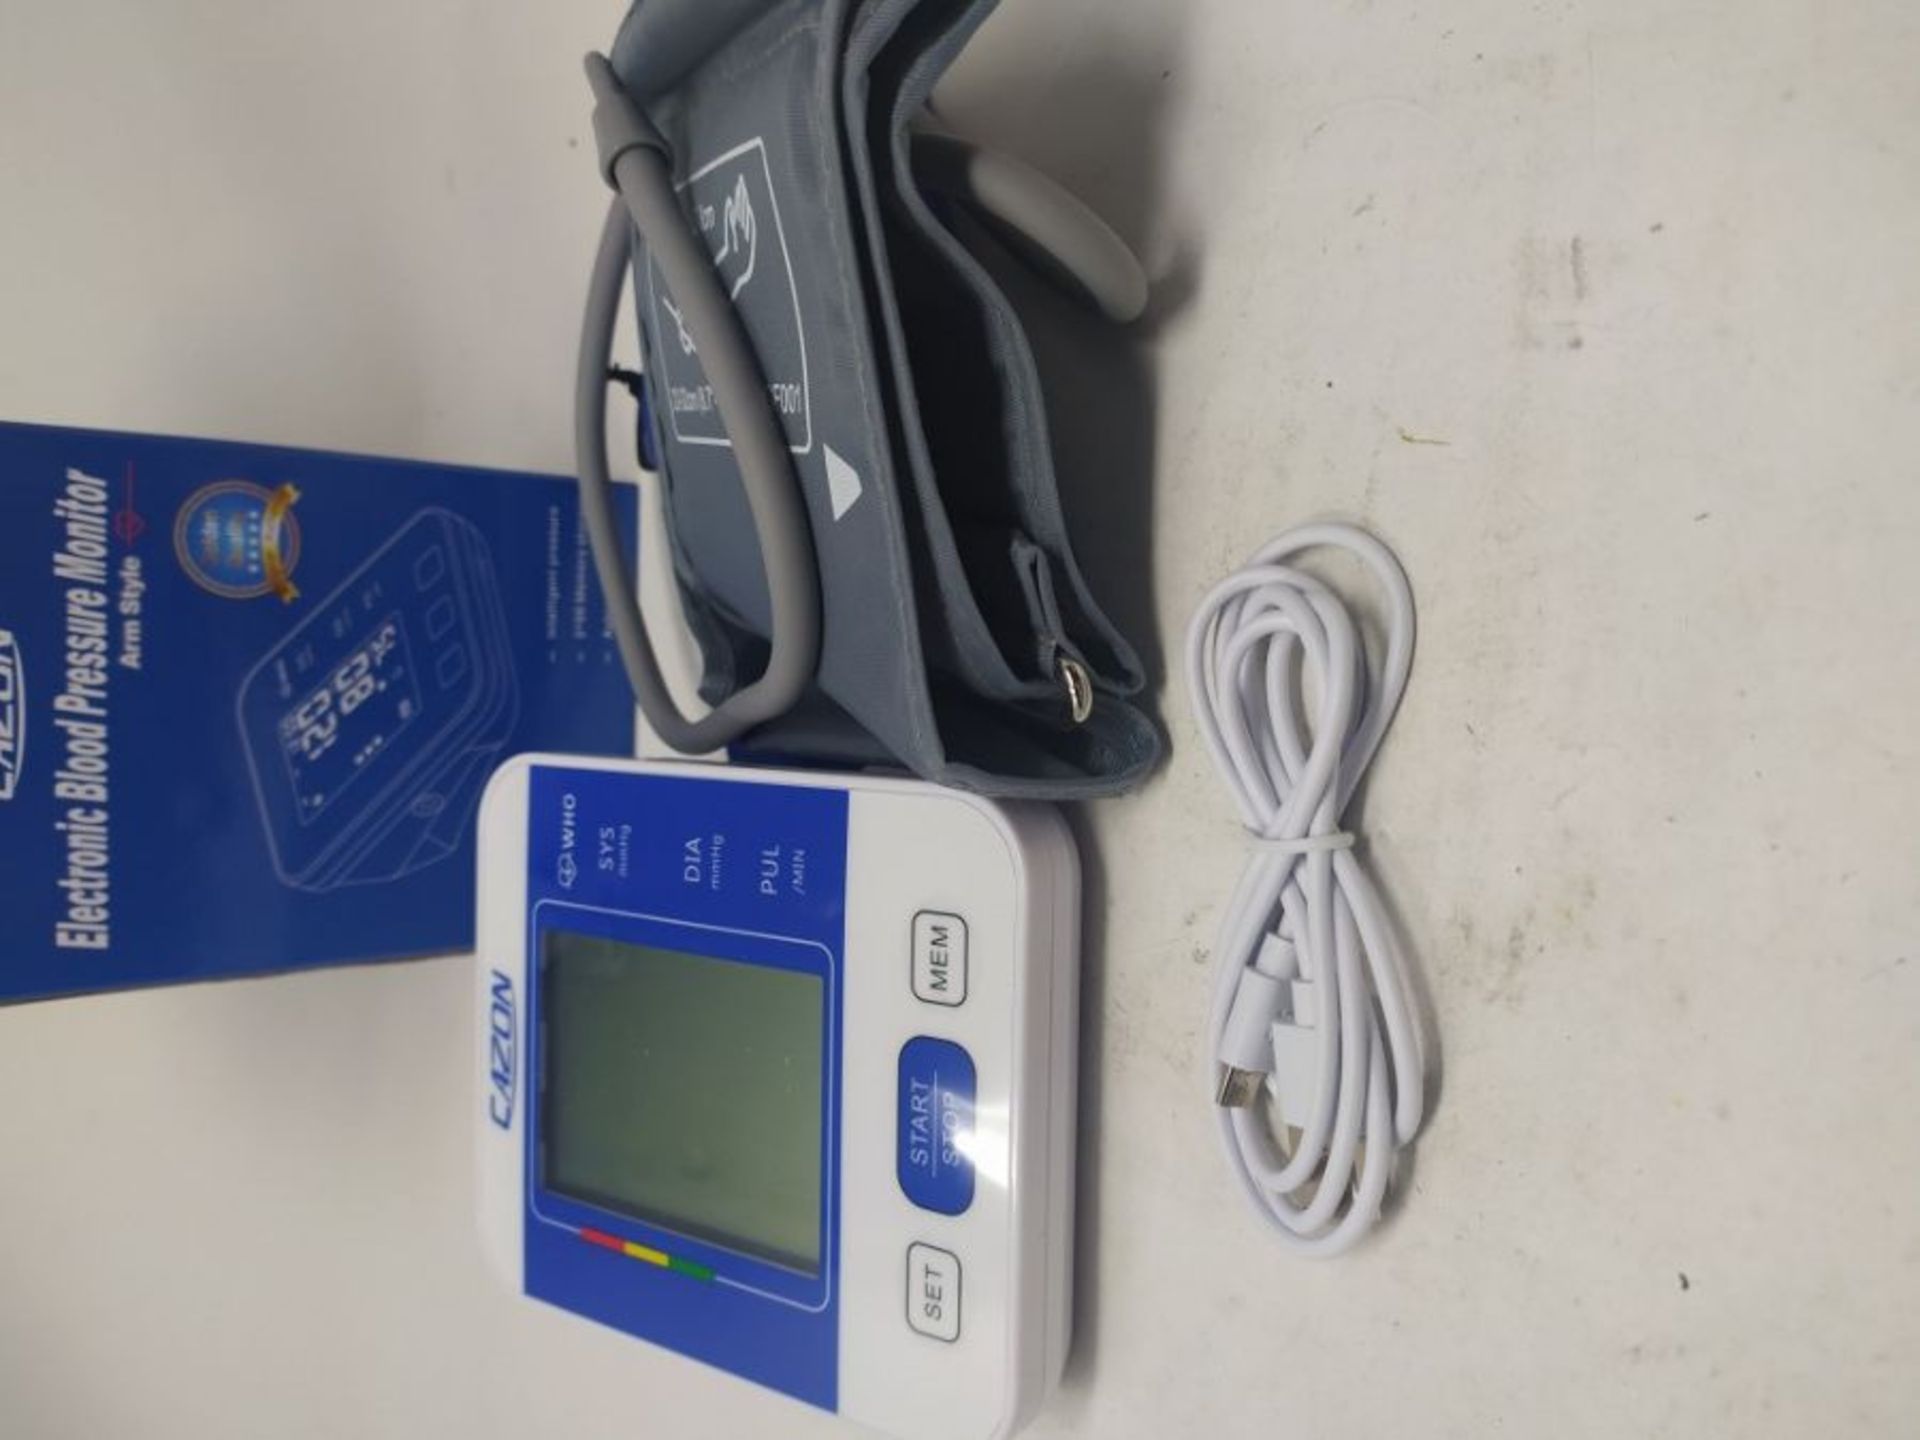 CAZON Blood Pressure Monitor Upper Arm BP Machine for Home Use BP Cuff Kit Pulse Rate - Image 2 of 2